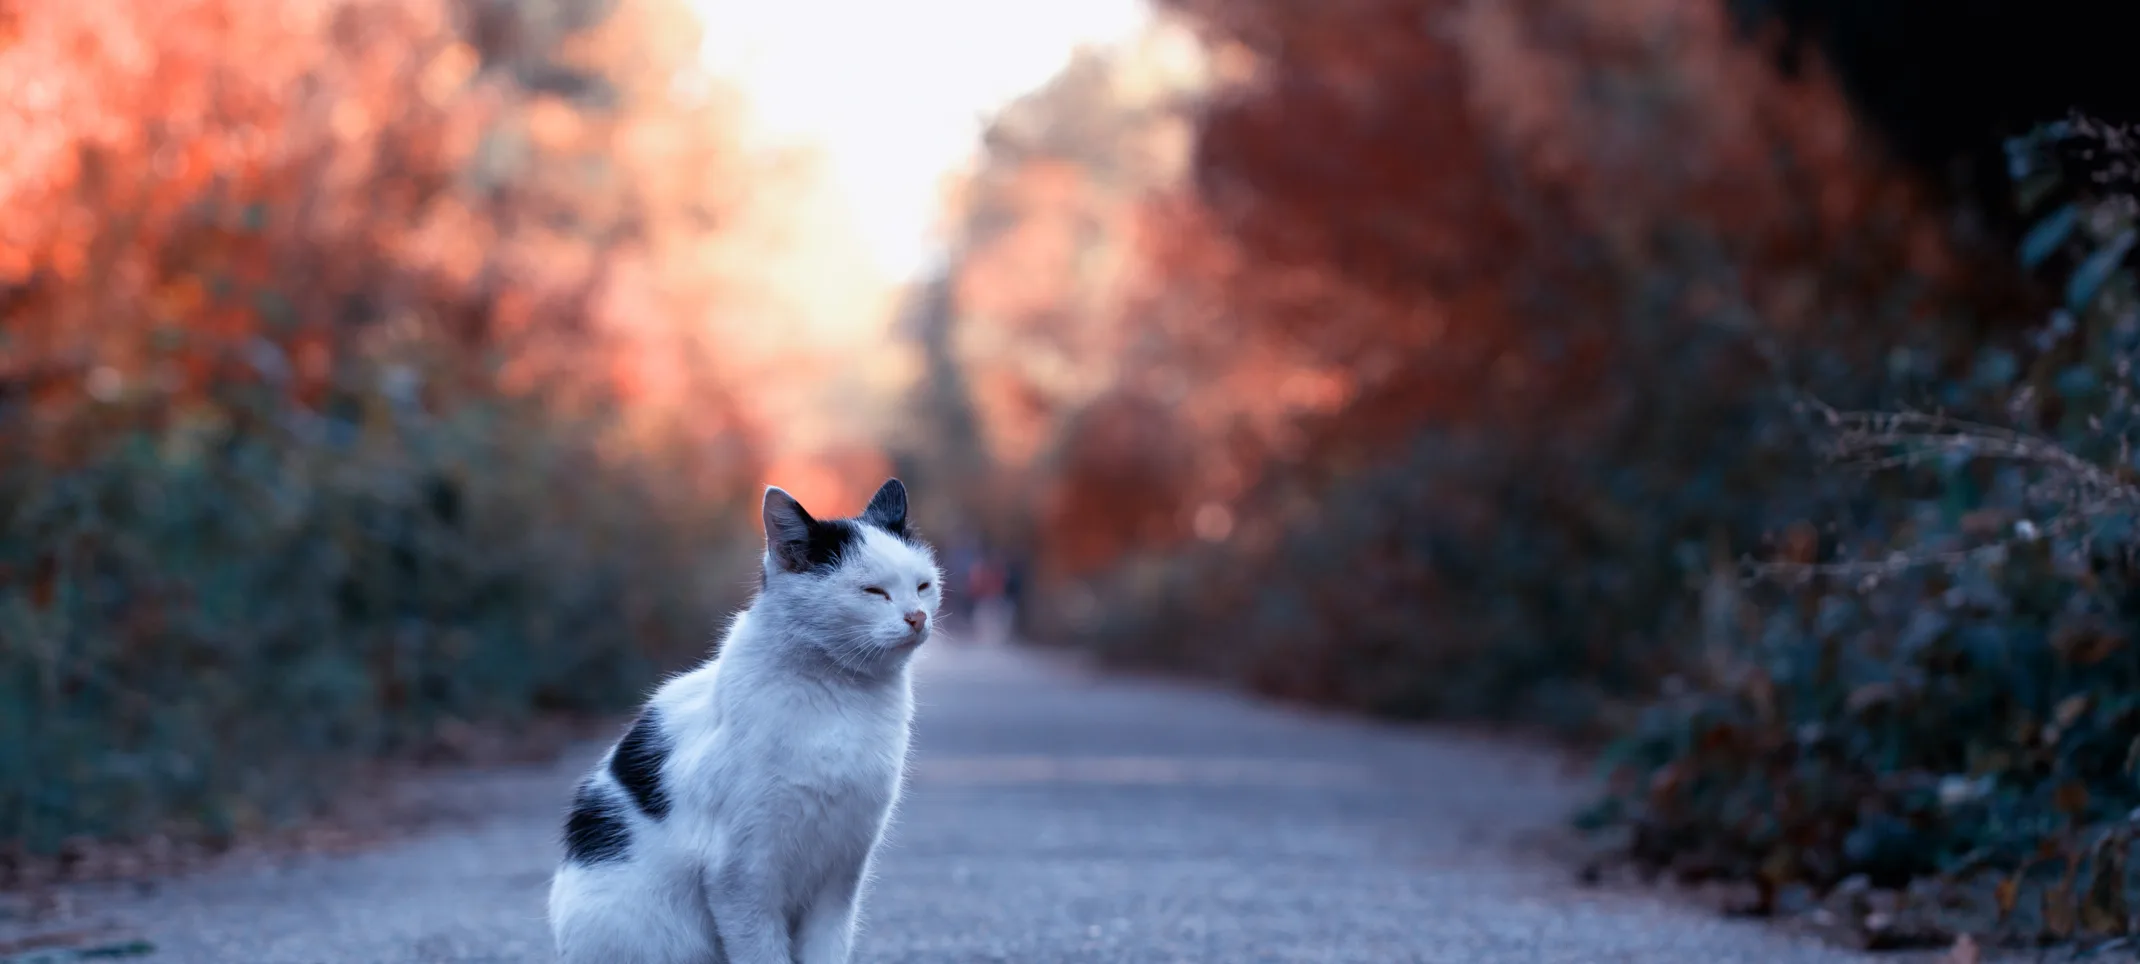 Cat sitting in the middle of a road in nature 